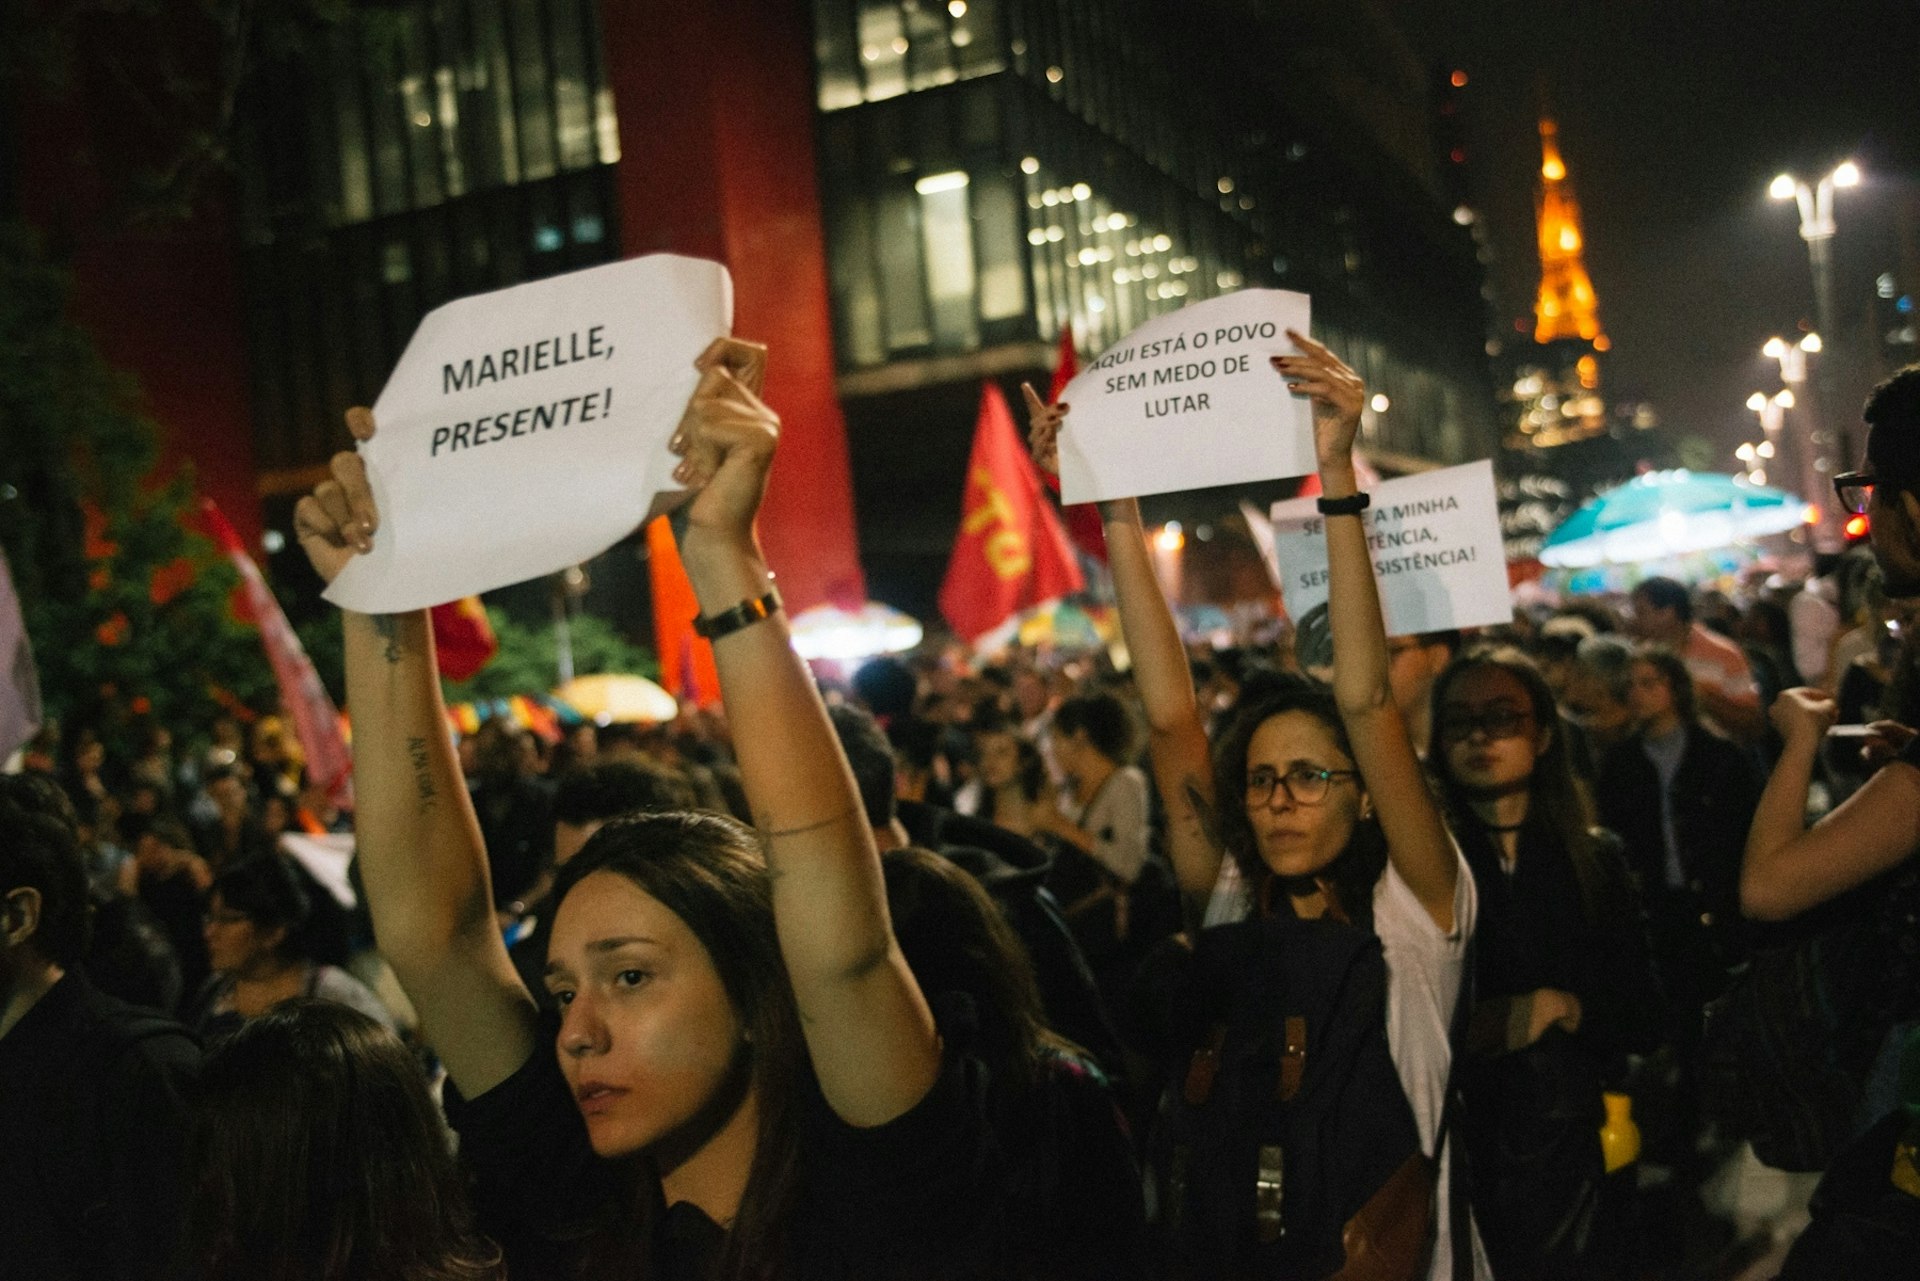 Young Brazilians take to the streets over hate attacks